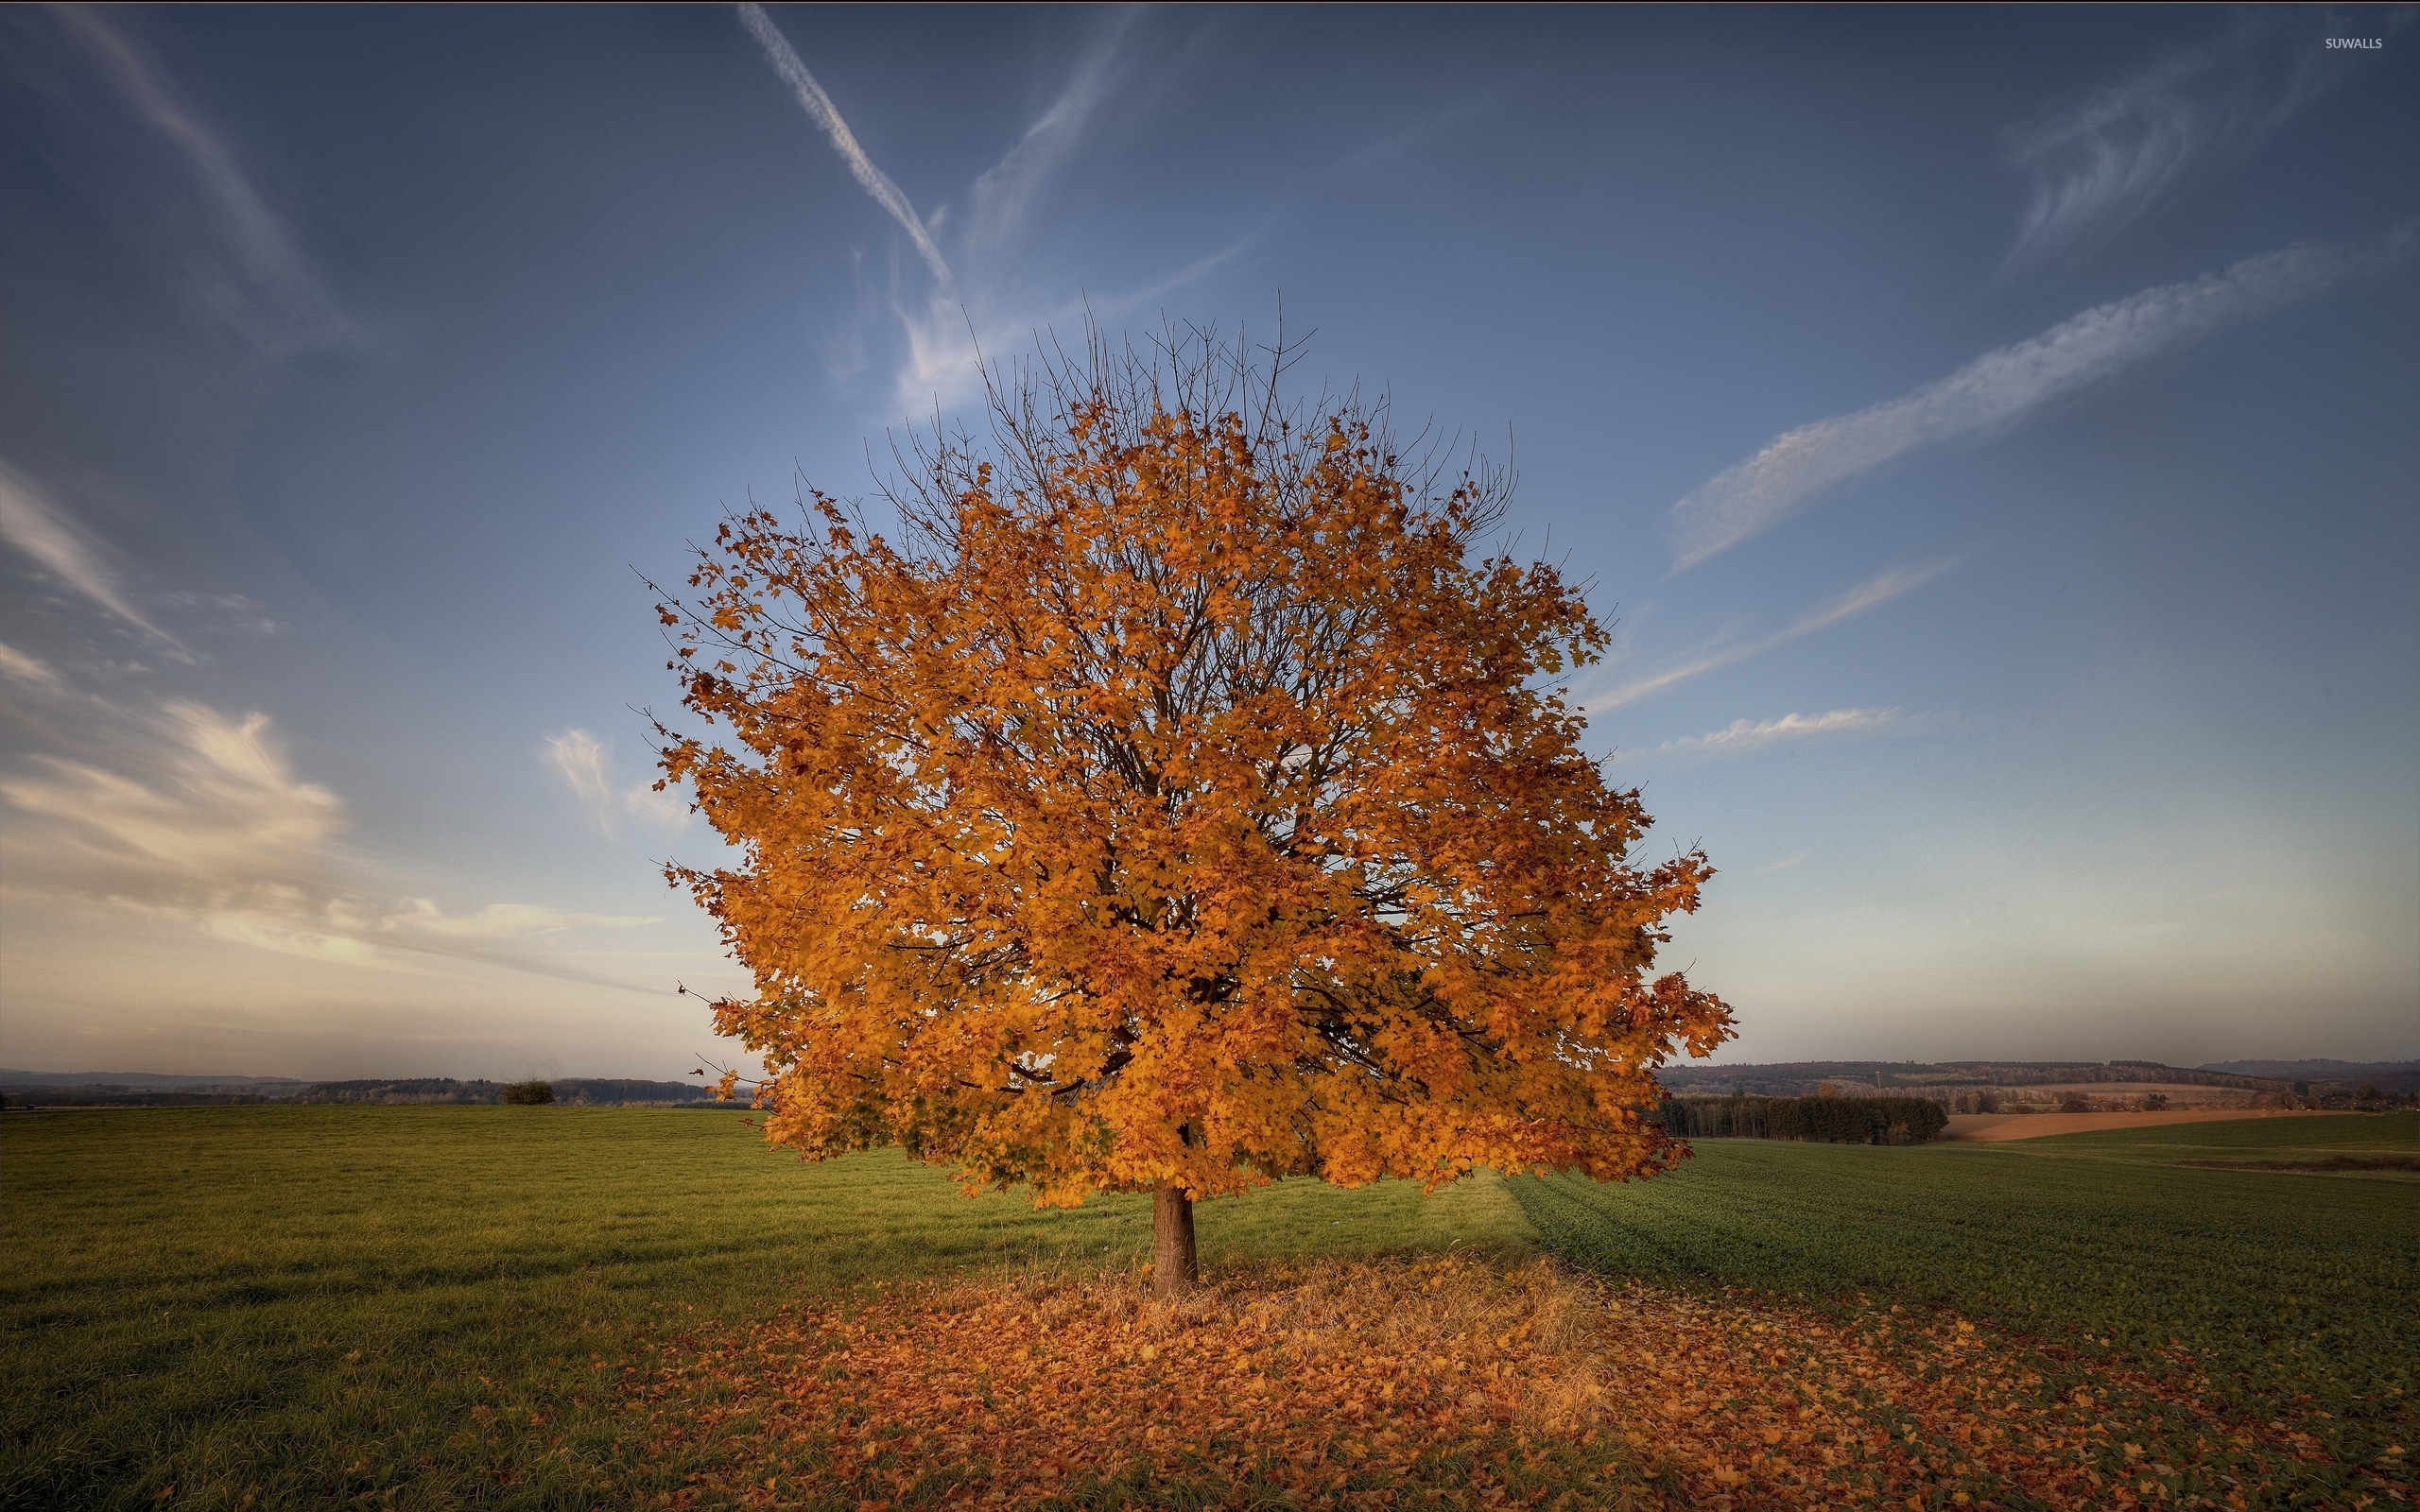 Lonesome Autumn Tree Losing Its Leaves On The Field Wallpaper